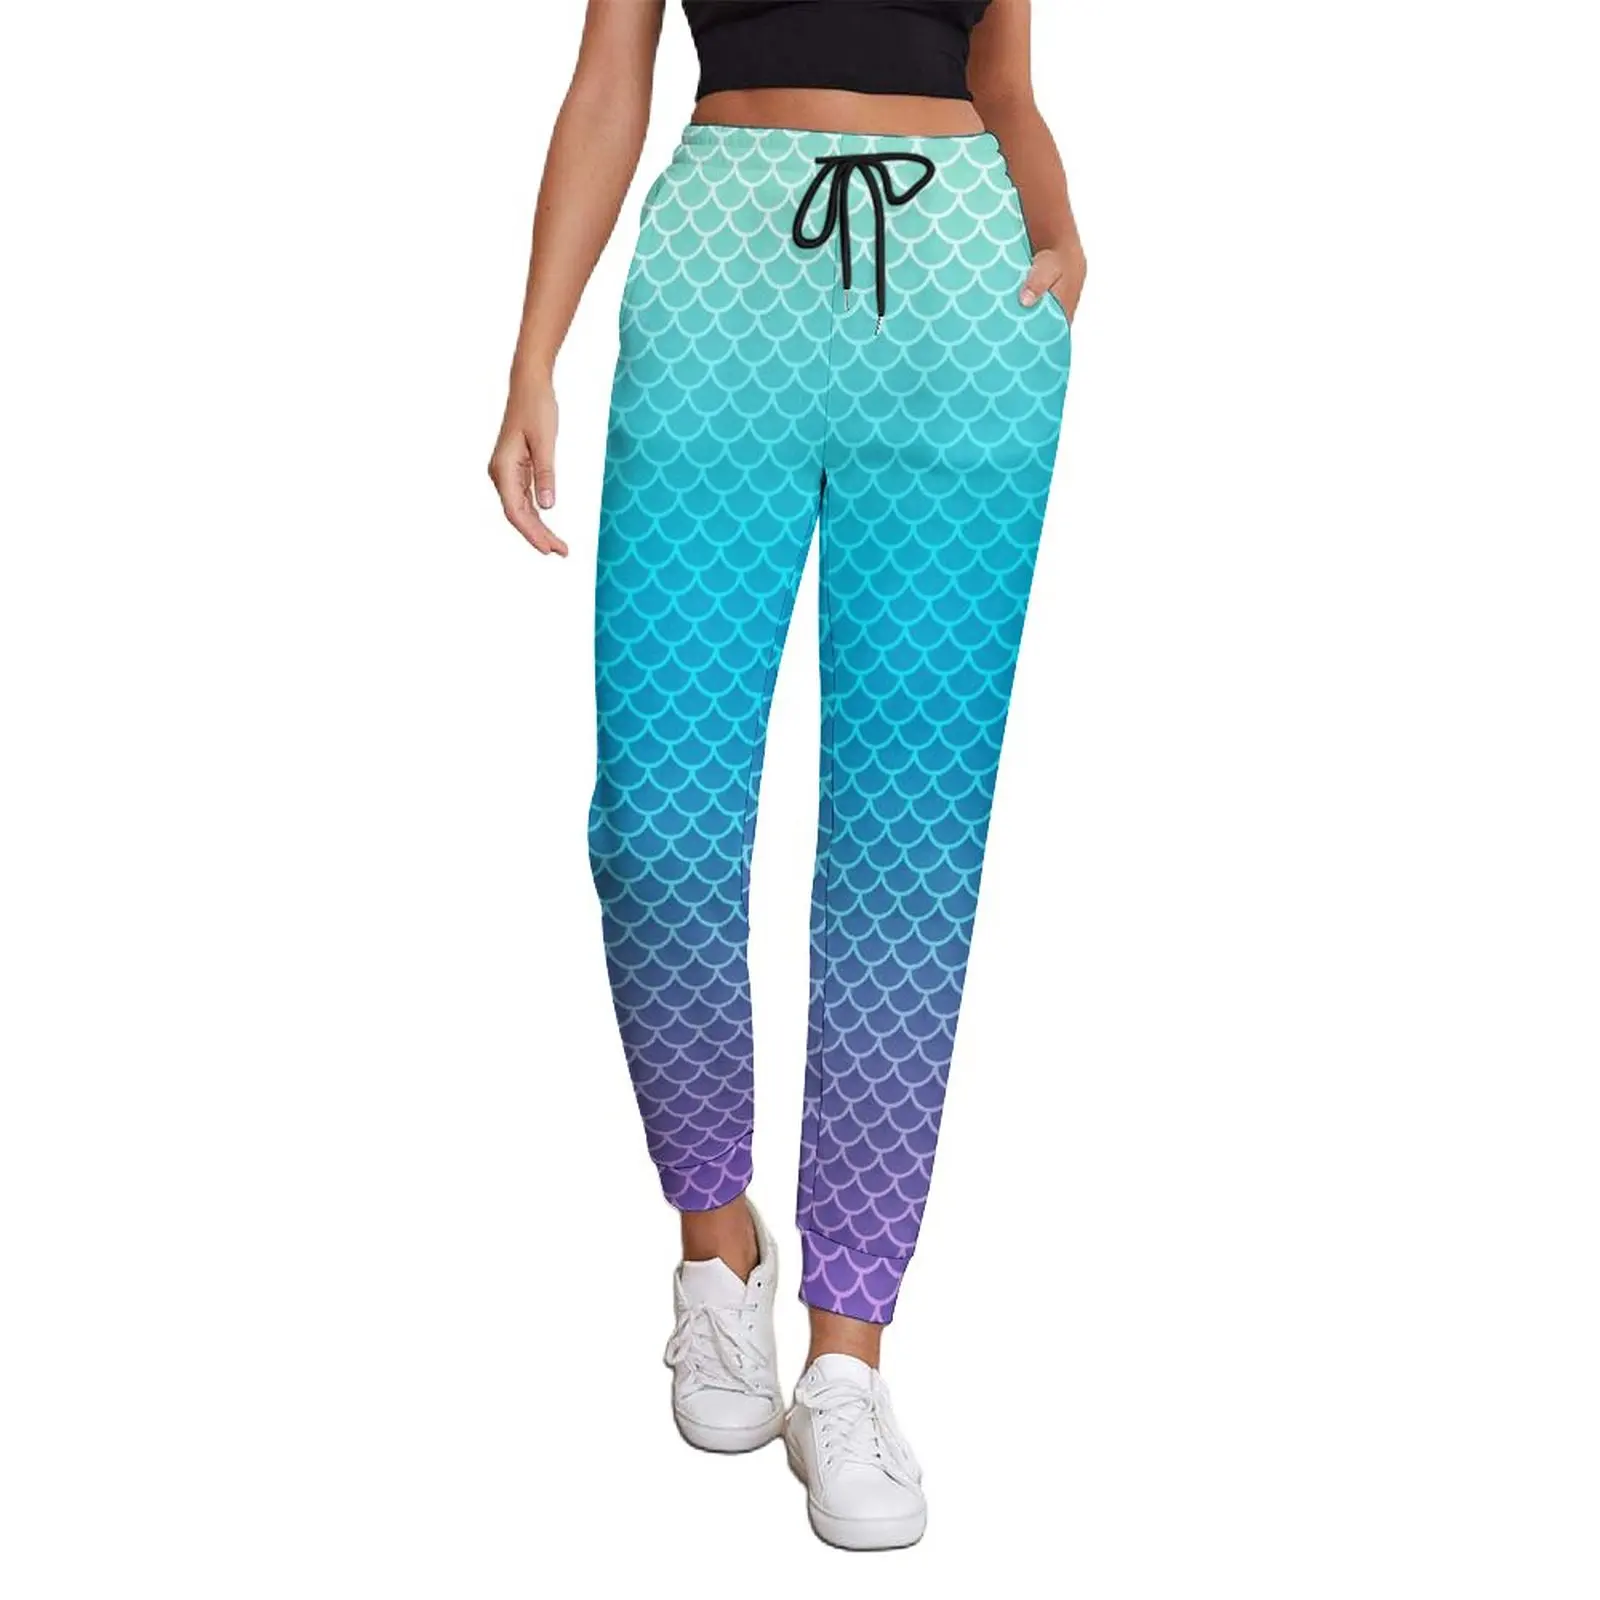 

Ombre Mermaids Jogger Pants Spring Fish Scales Casual Sweatpants Female Street Wear Design Trousers Big Size